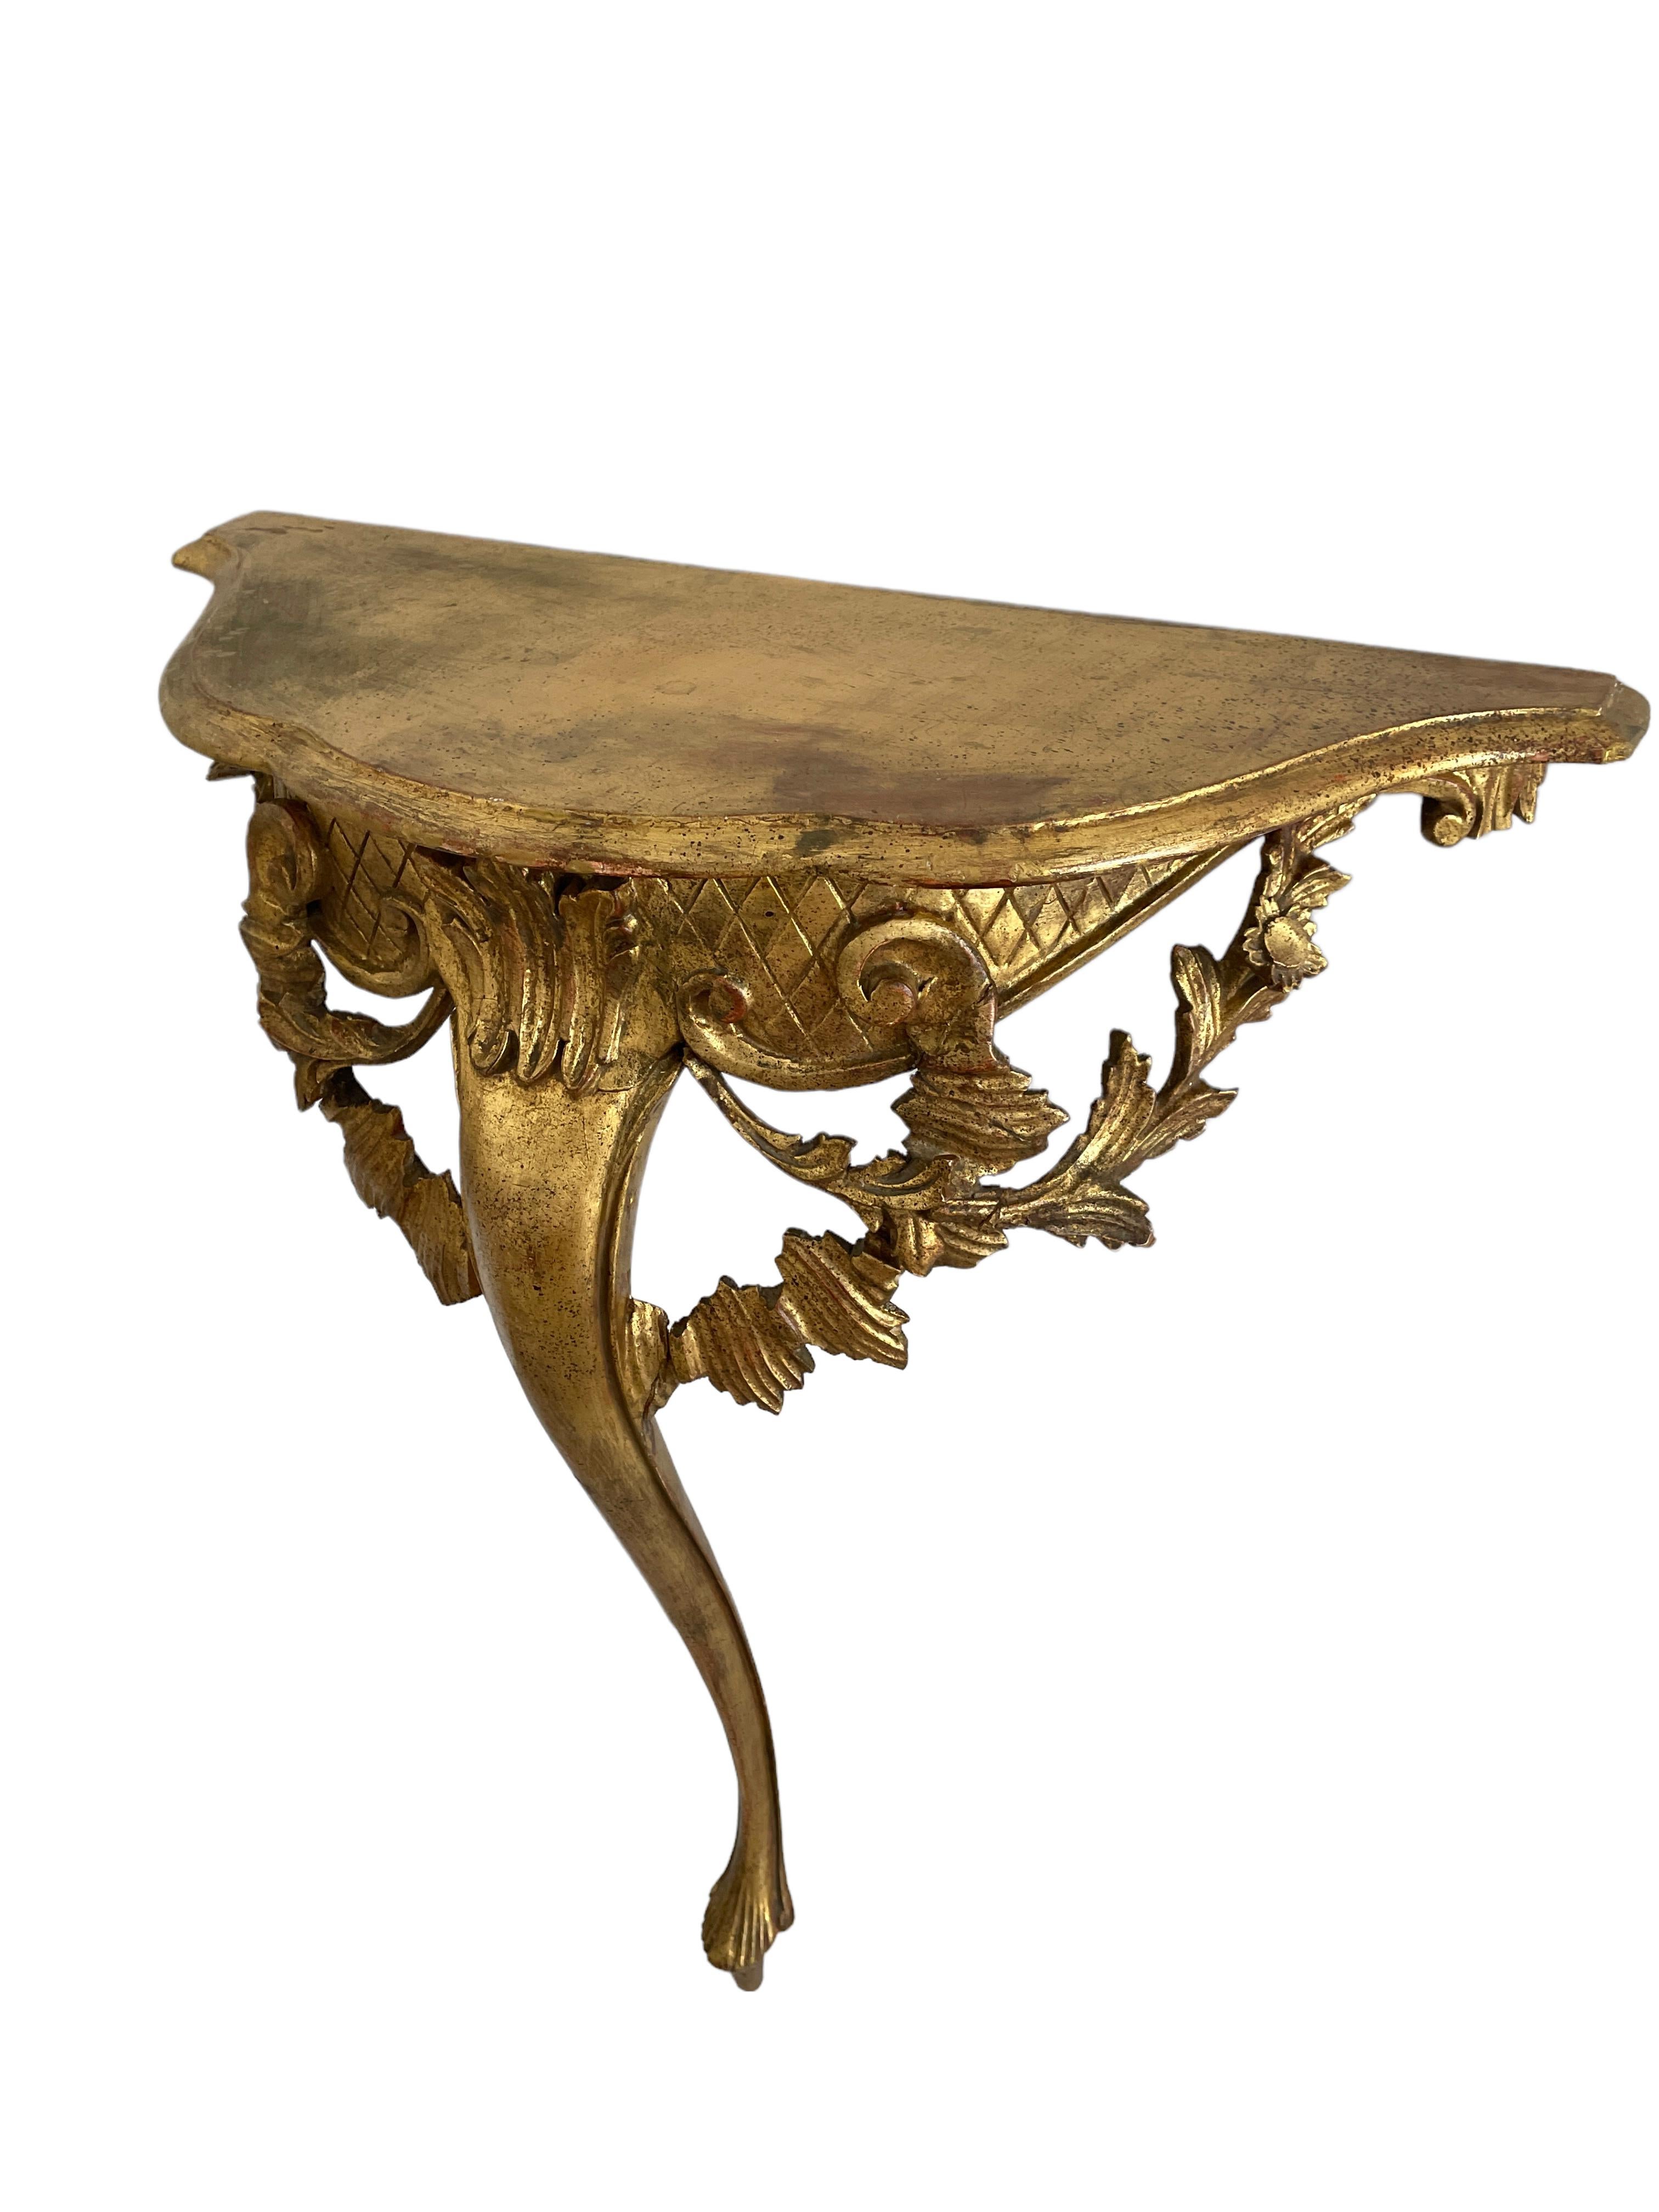 Vintage Hollywood Regency Tole Toleware Wall Console Table, Gilded Carved Wood 3